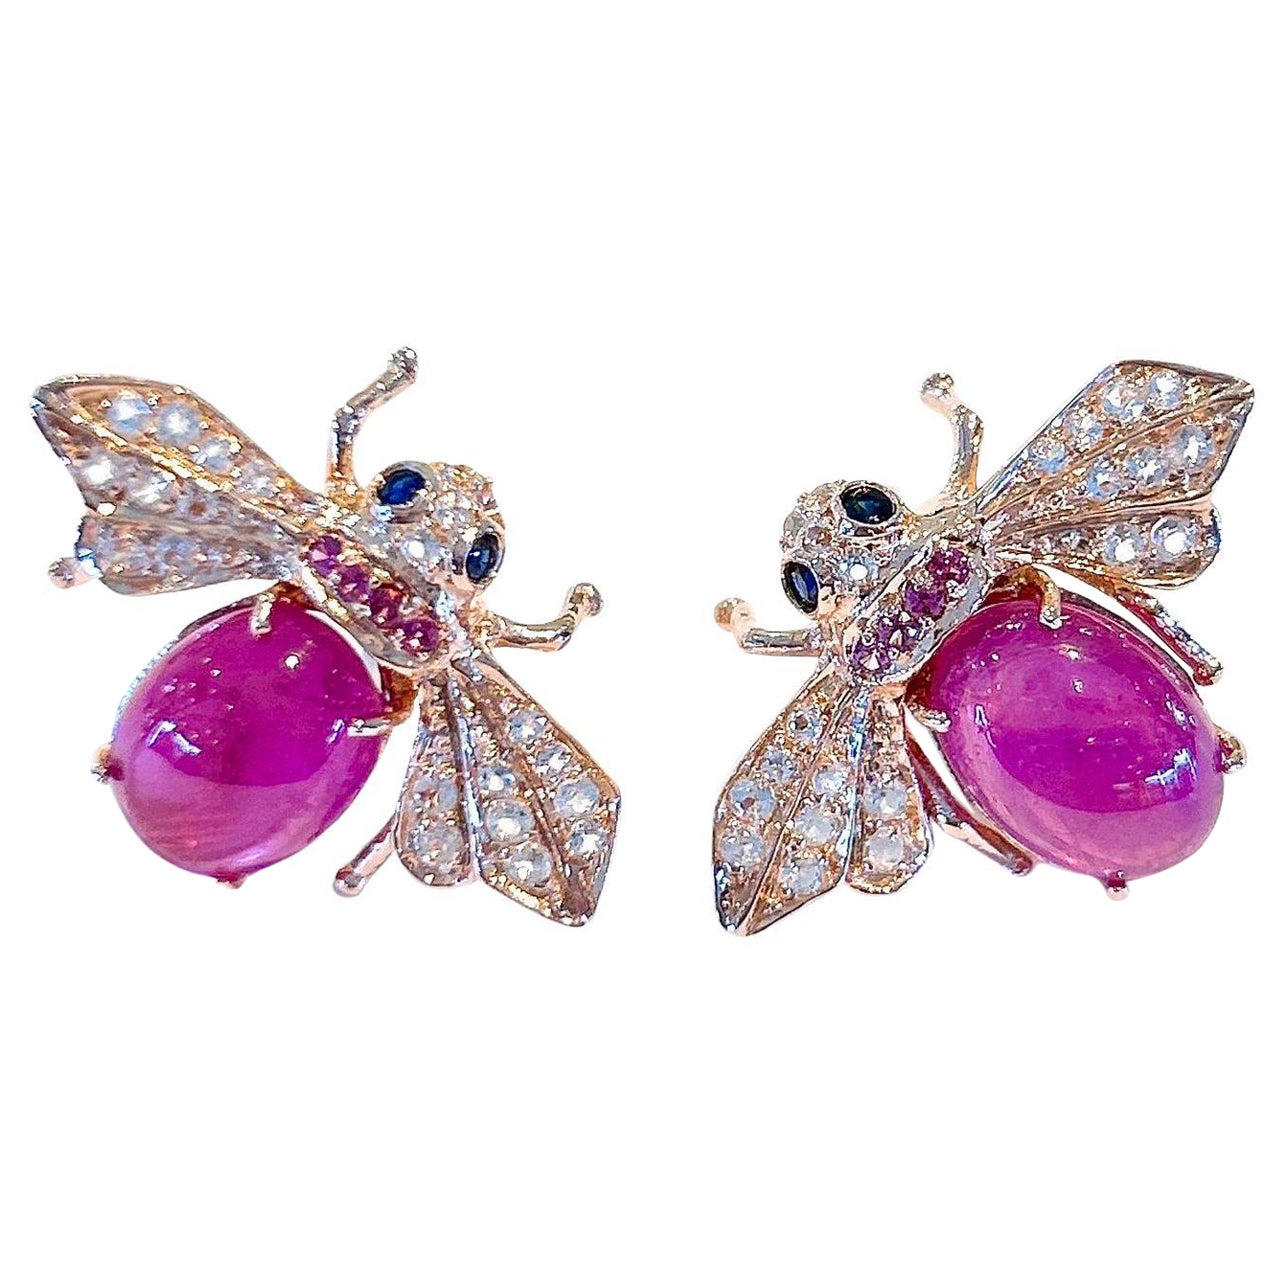 Bochic “Orient” Ruby Earrings with White Topaz & Blue Sapphire Set in 22k Gold For Sale